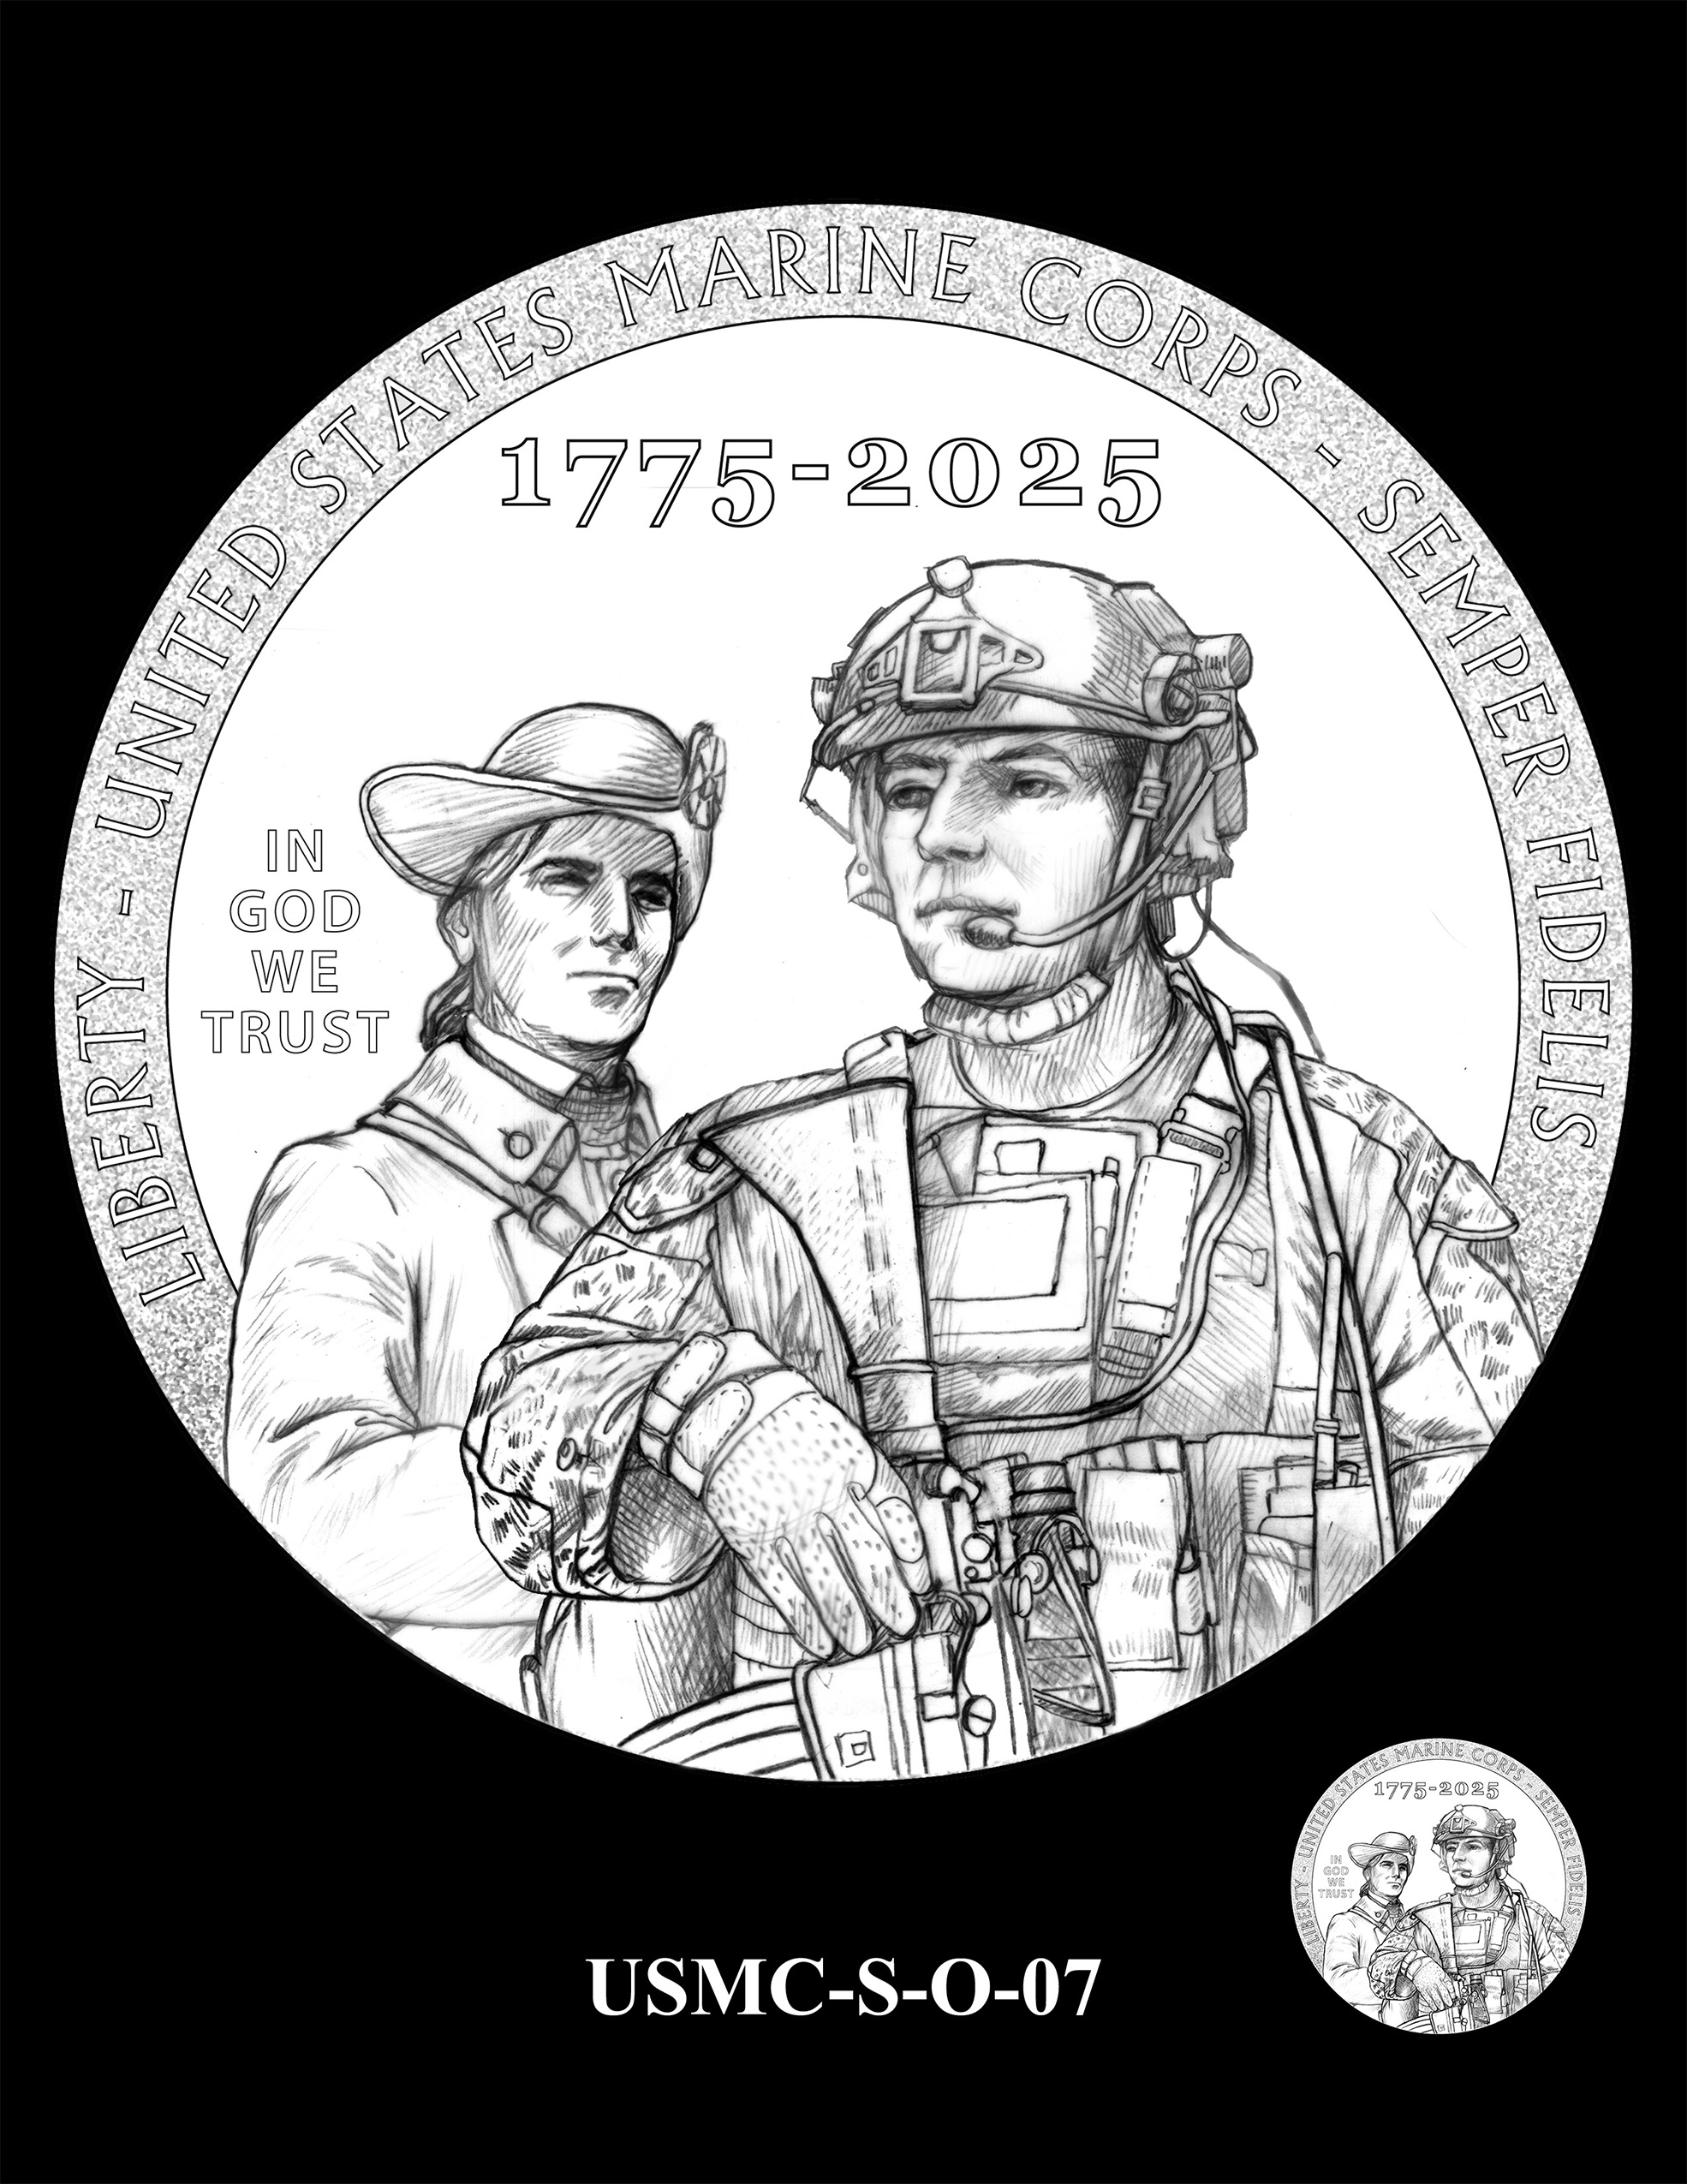 USMC-S-O-07 -- 250th Anniversary of the United States Marine Corps - Silver